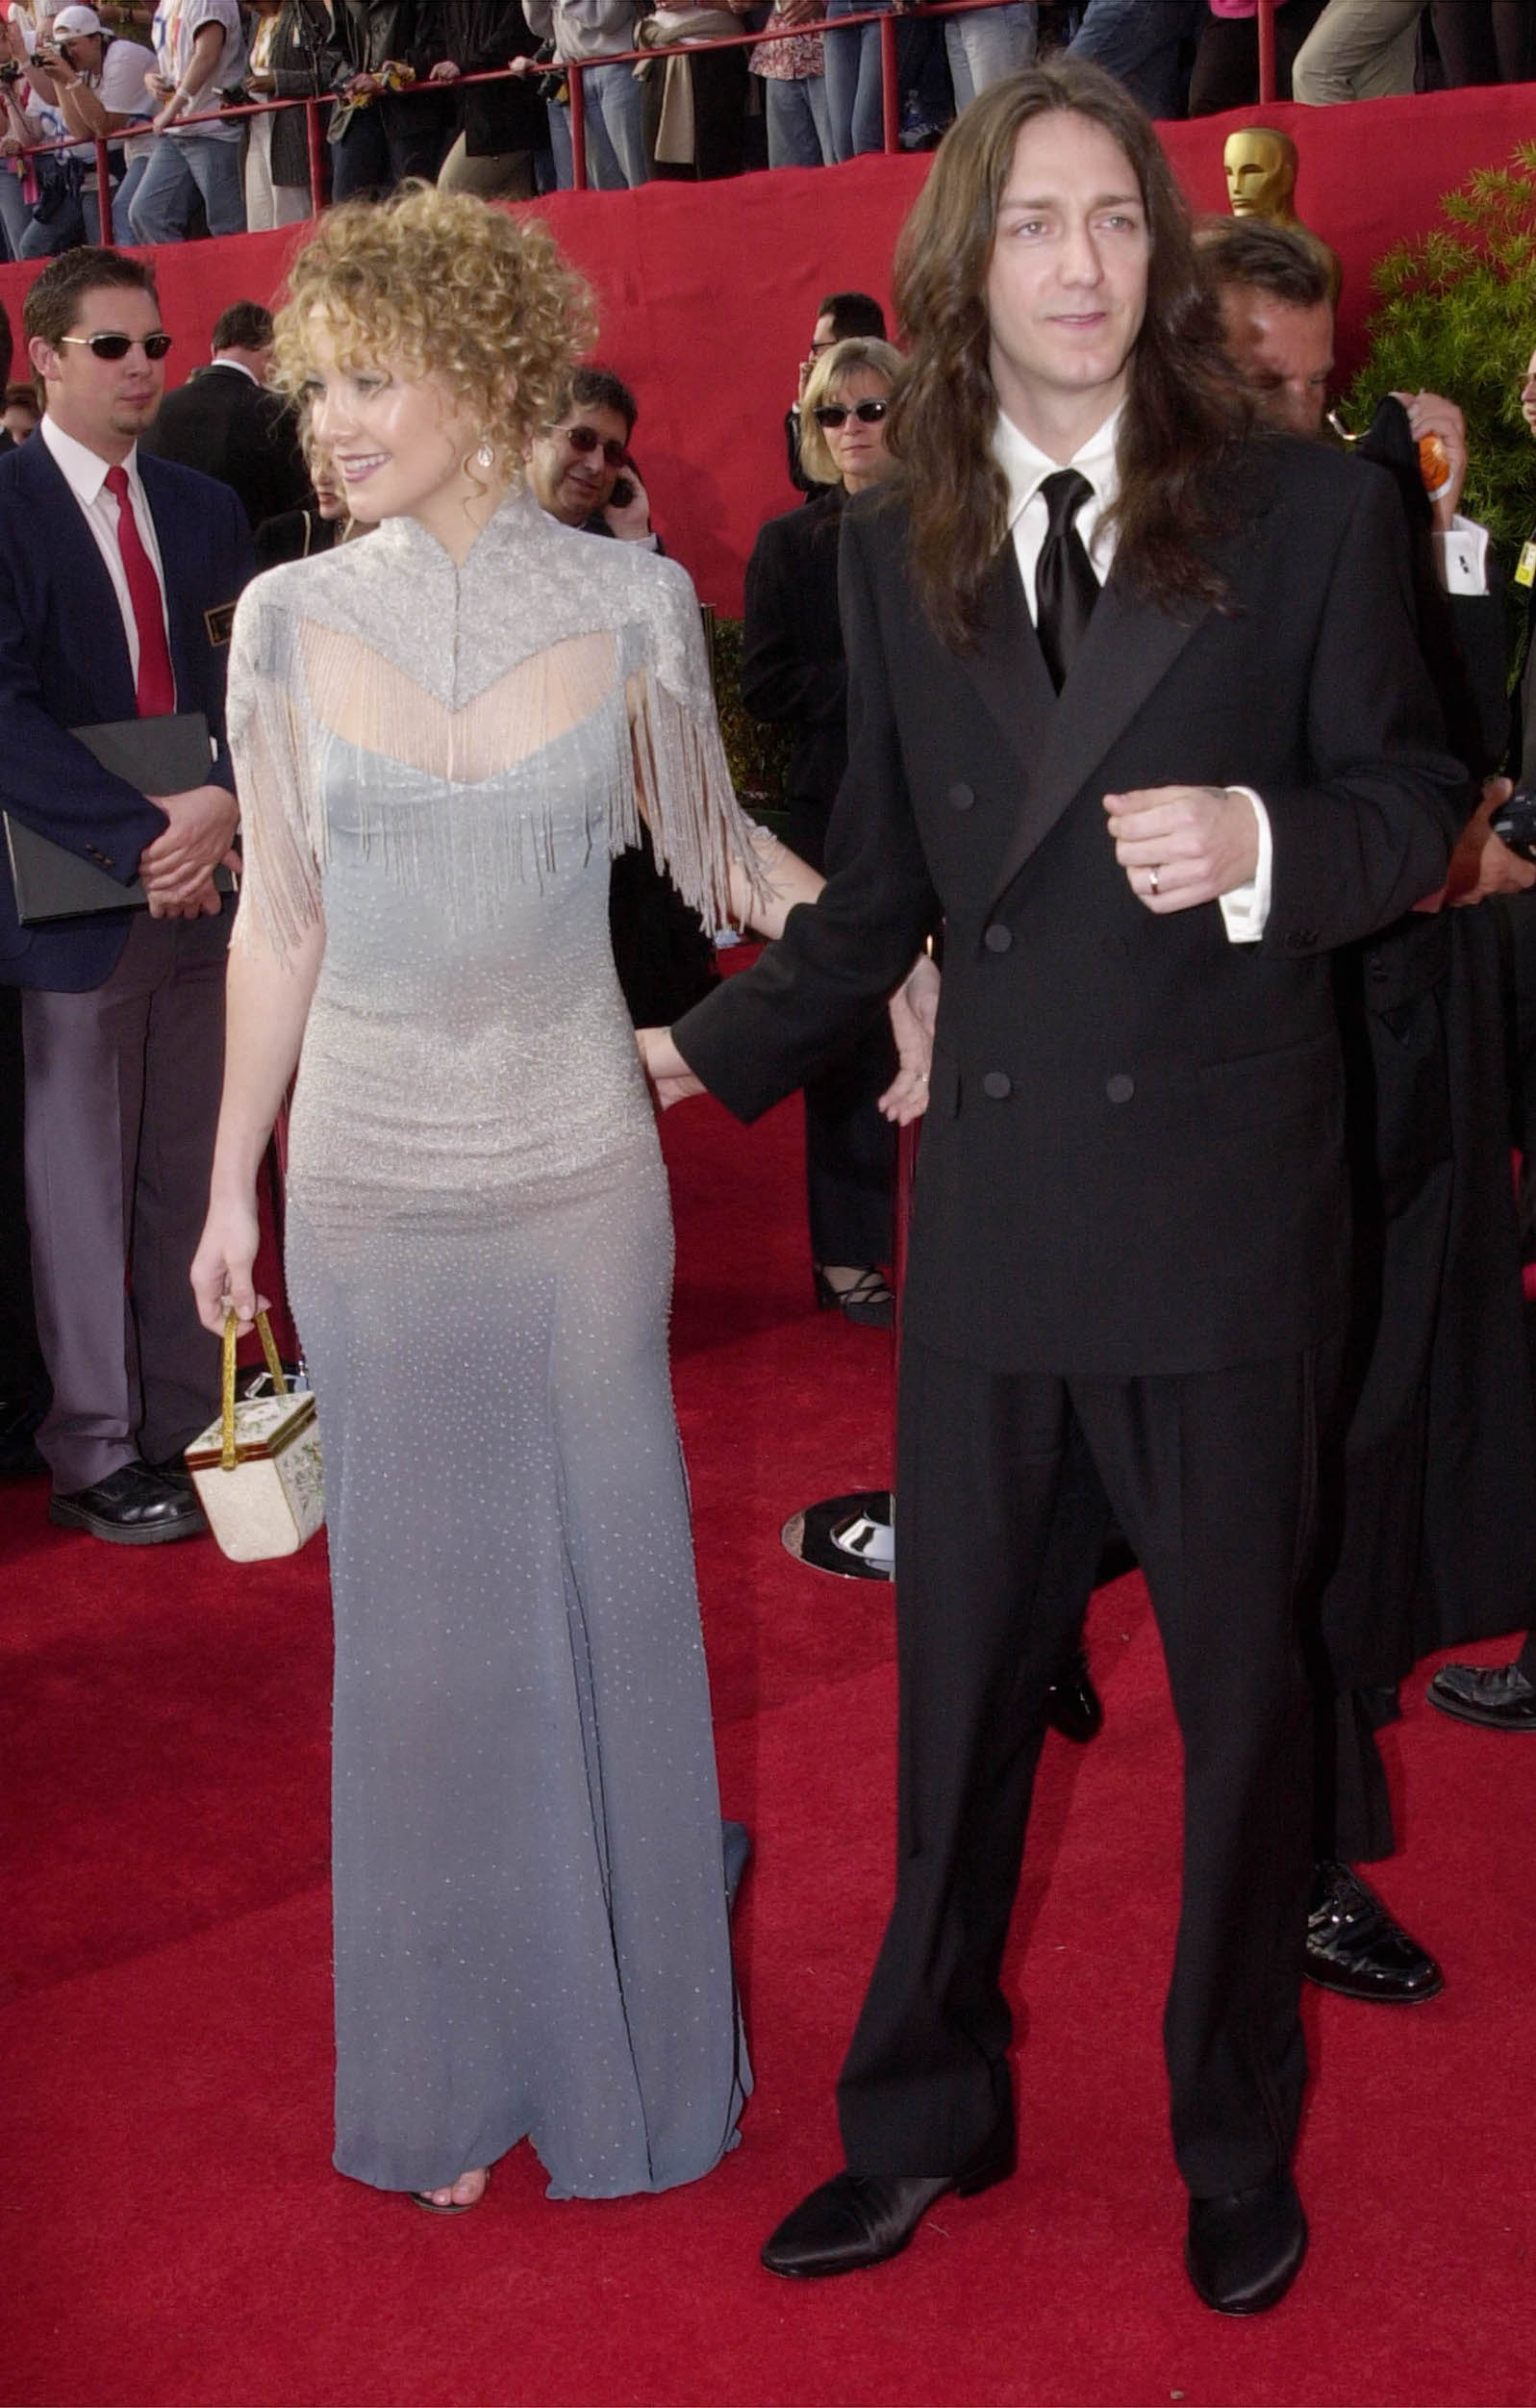 386900 235: Actress Kate Hudson and her husband Chris Robinson, the Black Crowes' singer, arrive for the 73rd Annual Academy Awards March 25, 2001 at the Shrine Auditorium in Los Angeles. Hudson is wearing a Stella for Chloe McCartney dress and her hair is by Robert Vetica of Cloutier. (Photo by Getty Images